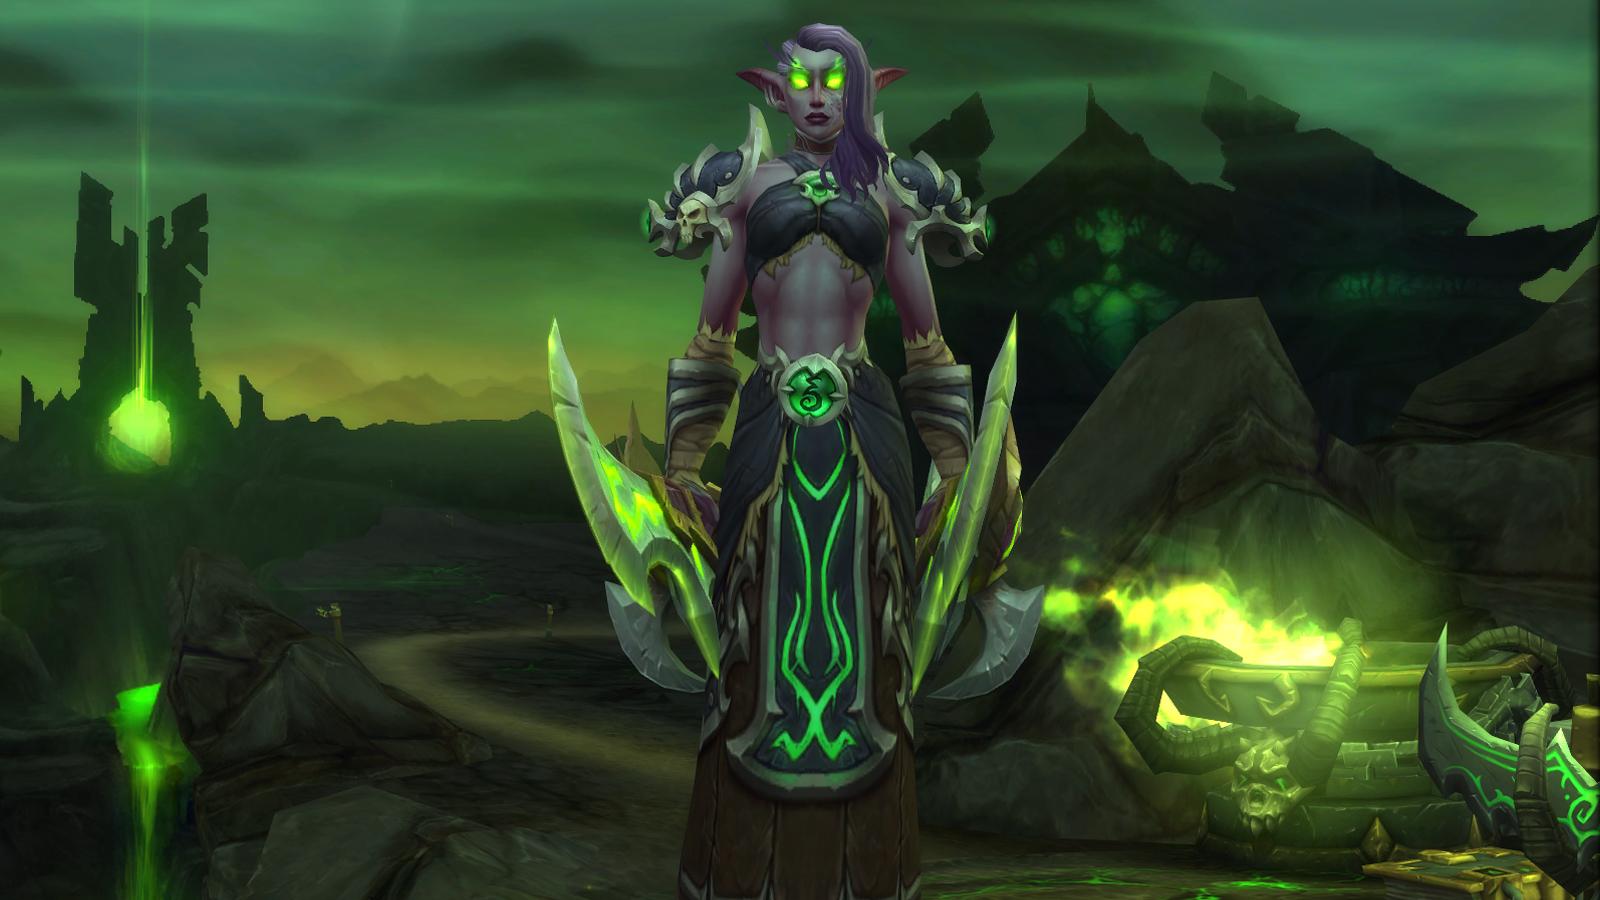 Demon Hunter Night Elf in the character select screen